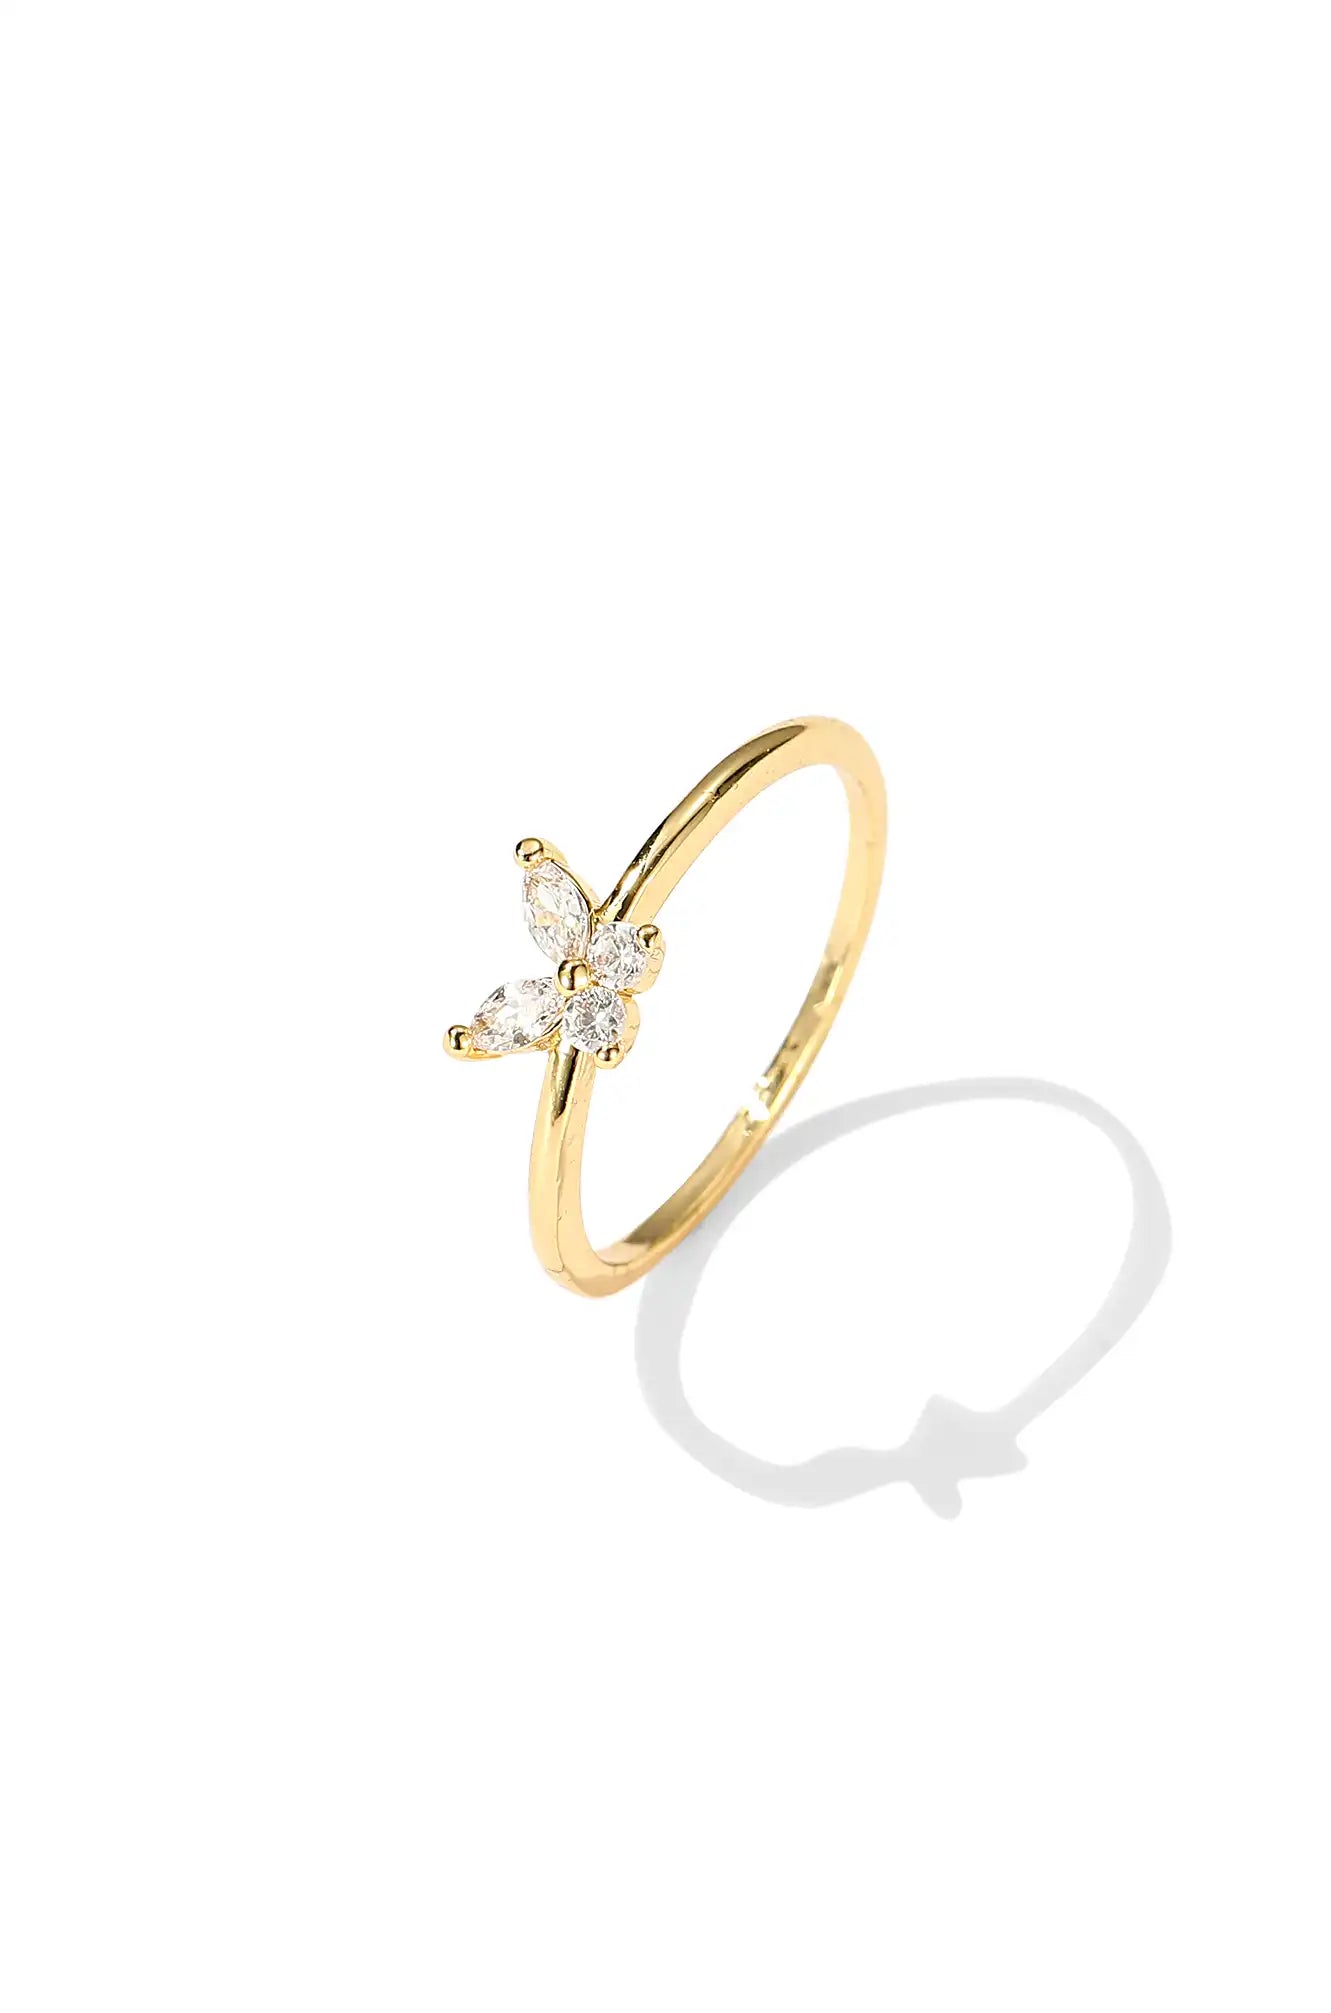 butterfly ring, gold butterfly ring